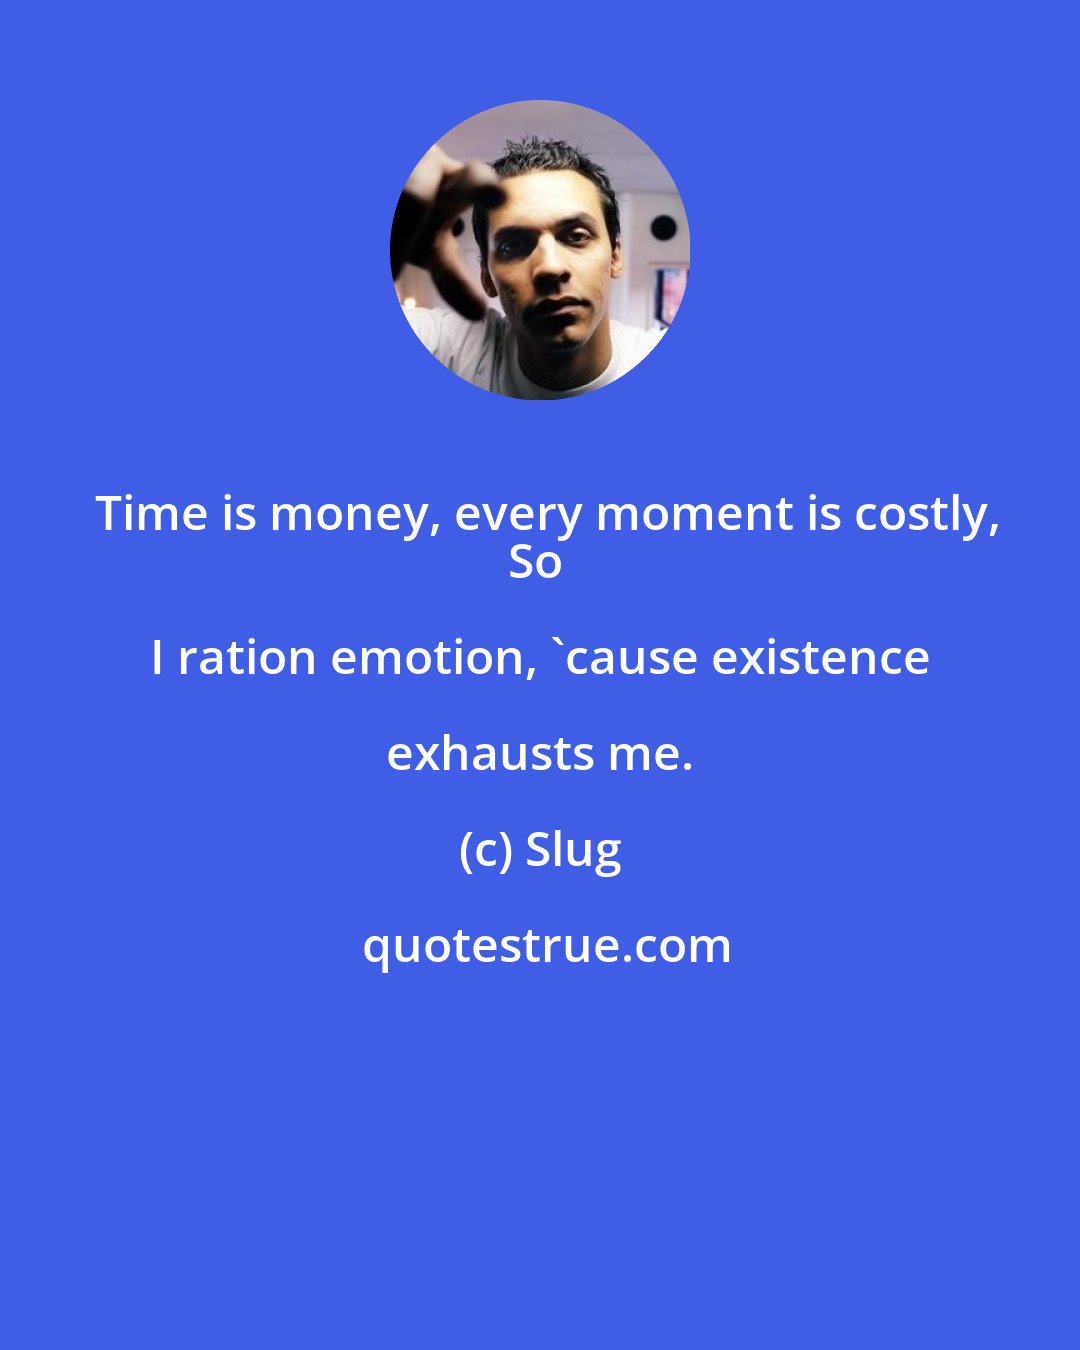 Slug: Time is money, every moment is costly,
So I ration emotion, 'cause existence exhausts me.